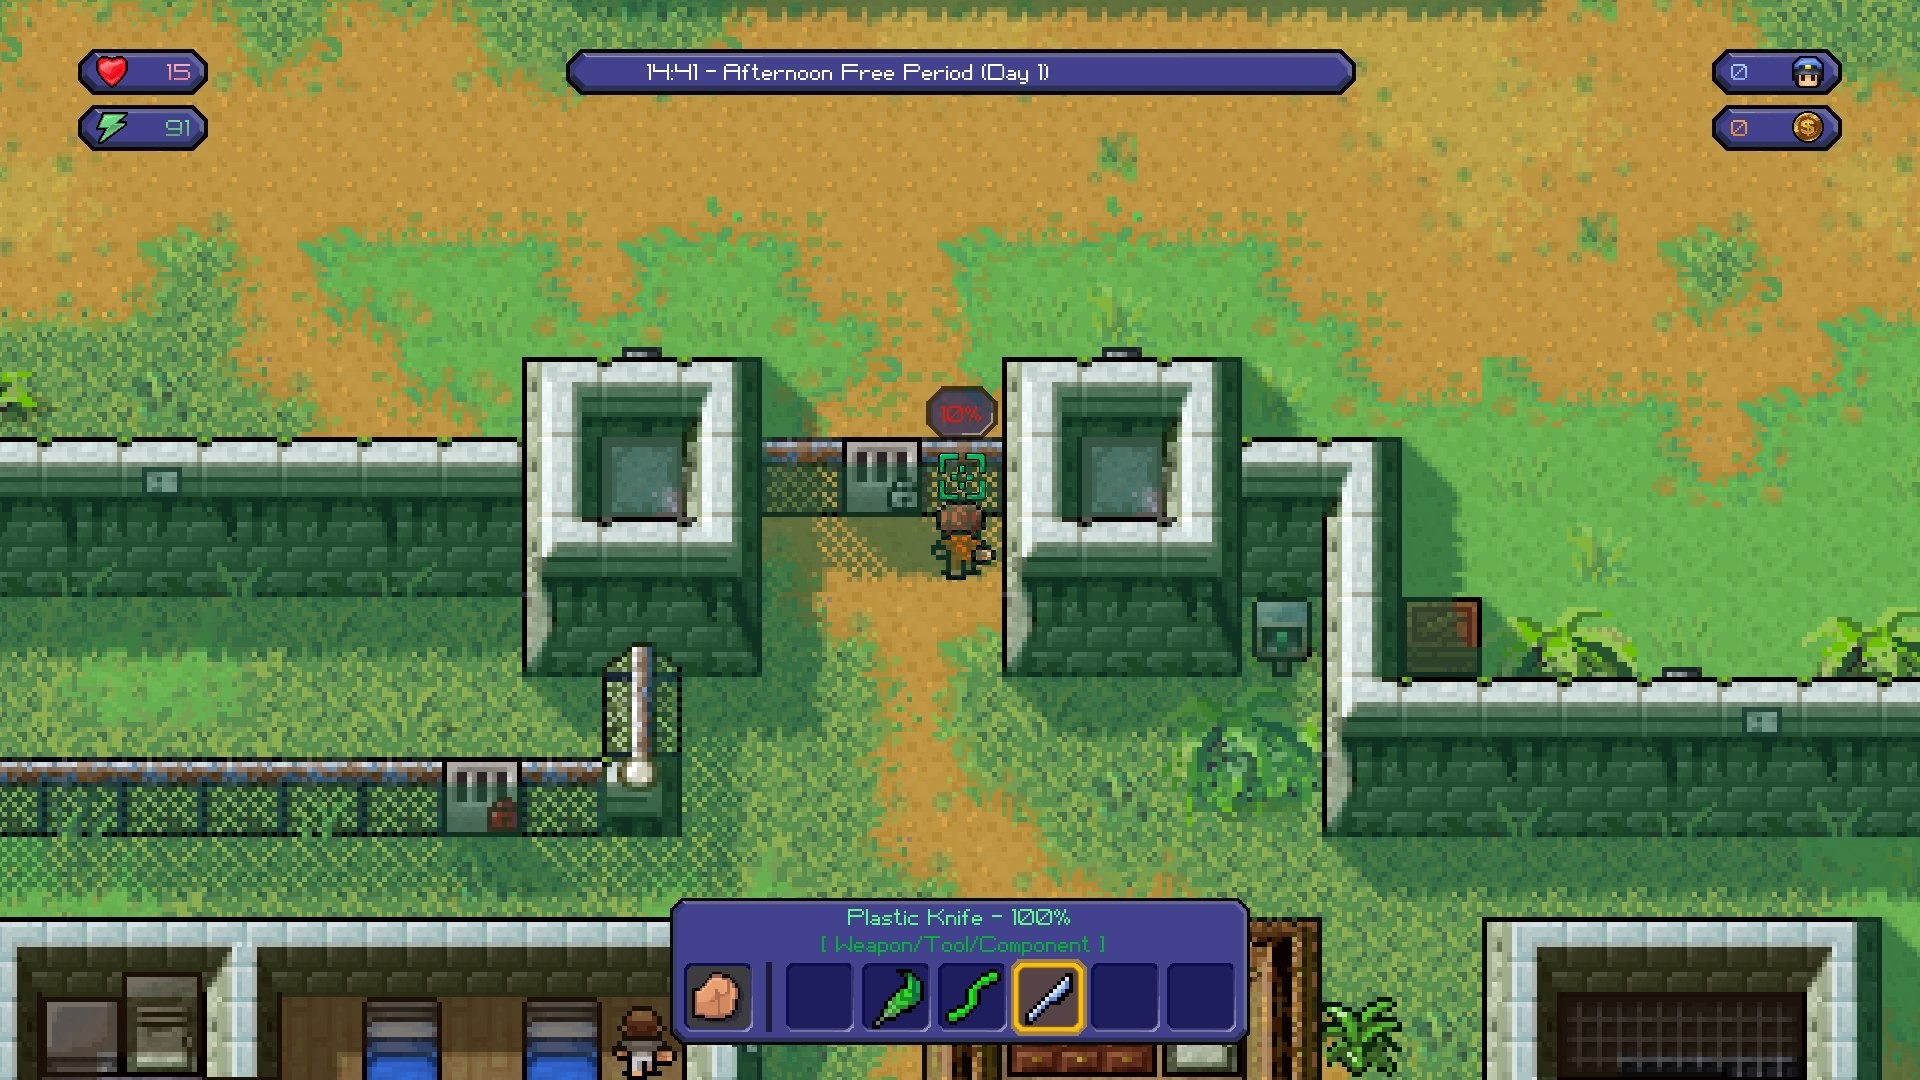 The Escapists 2 - Guide to Basic Escapology, Hints and Tips for Prisoners